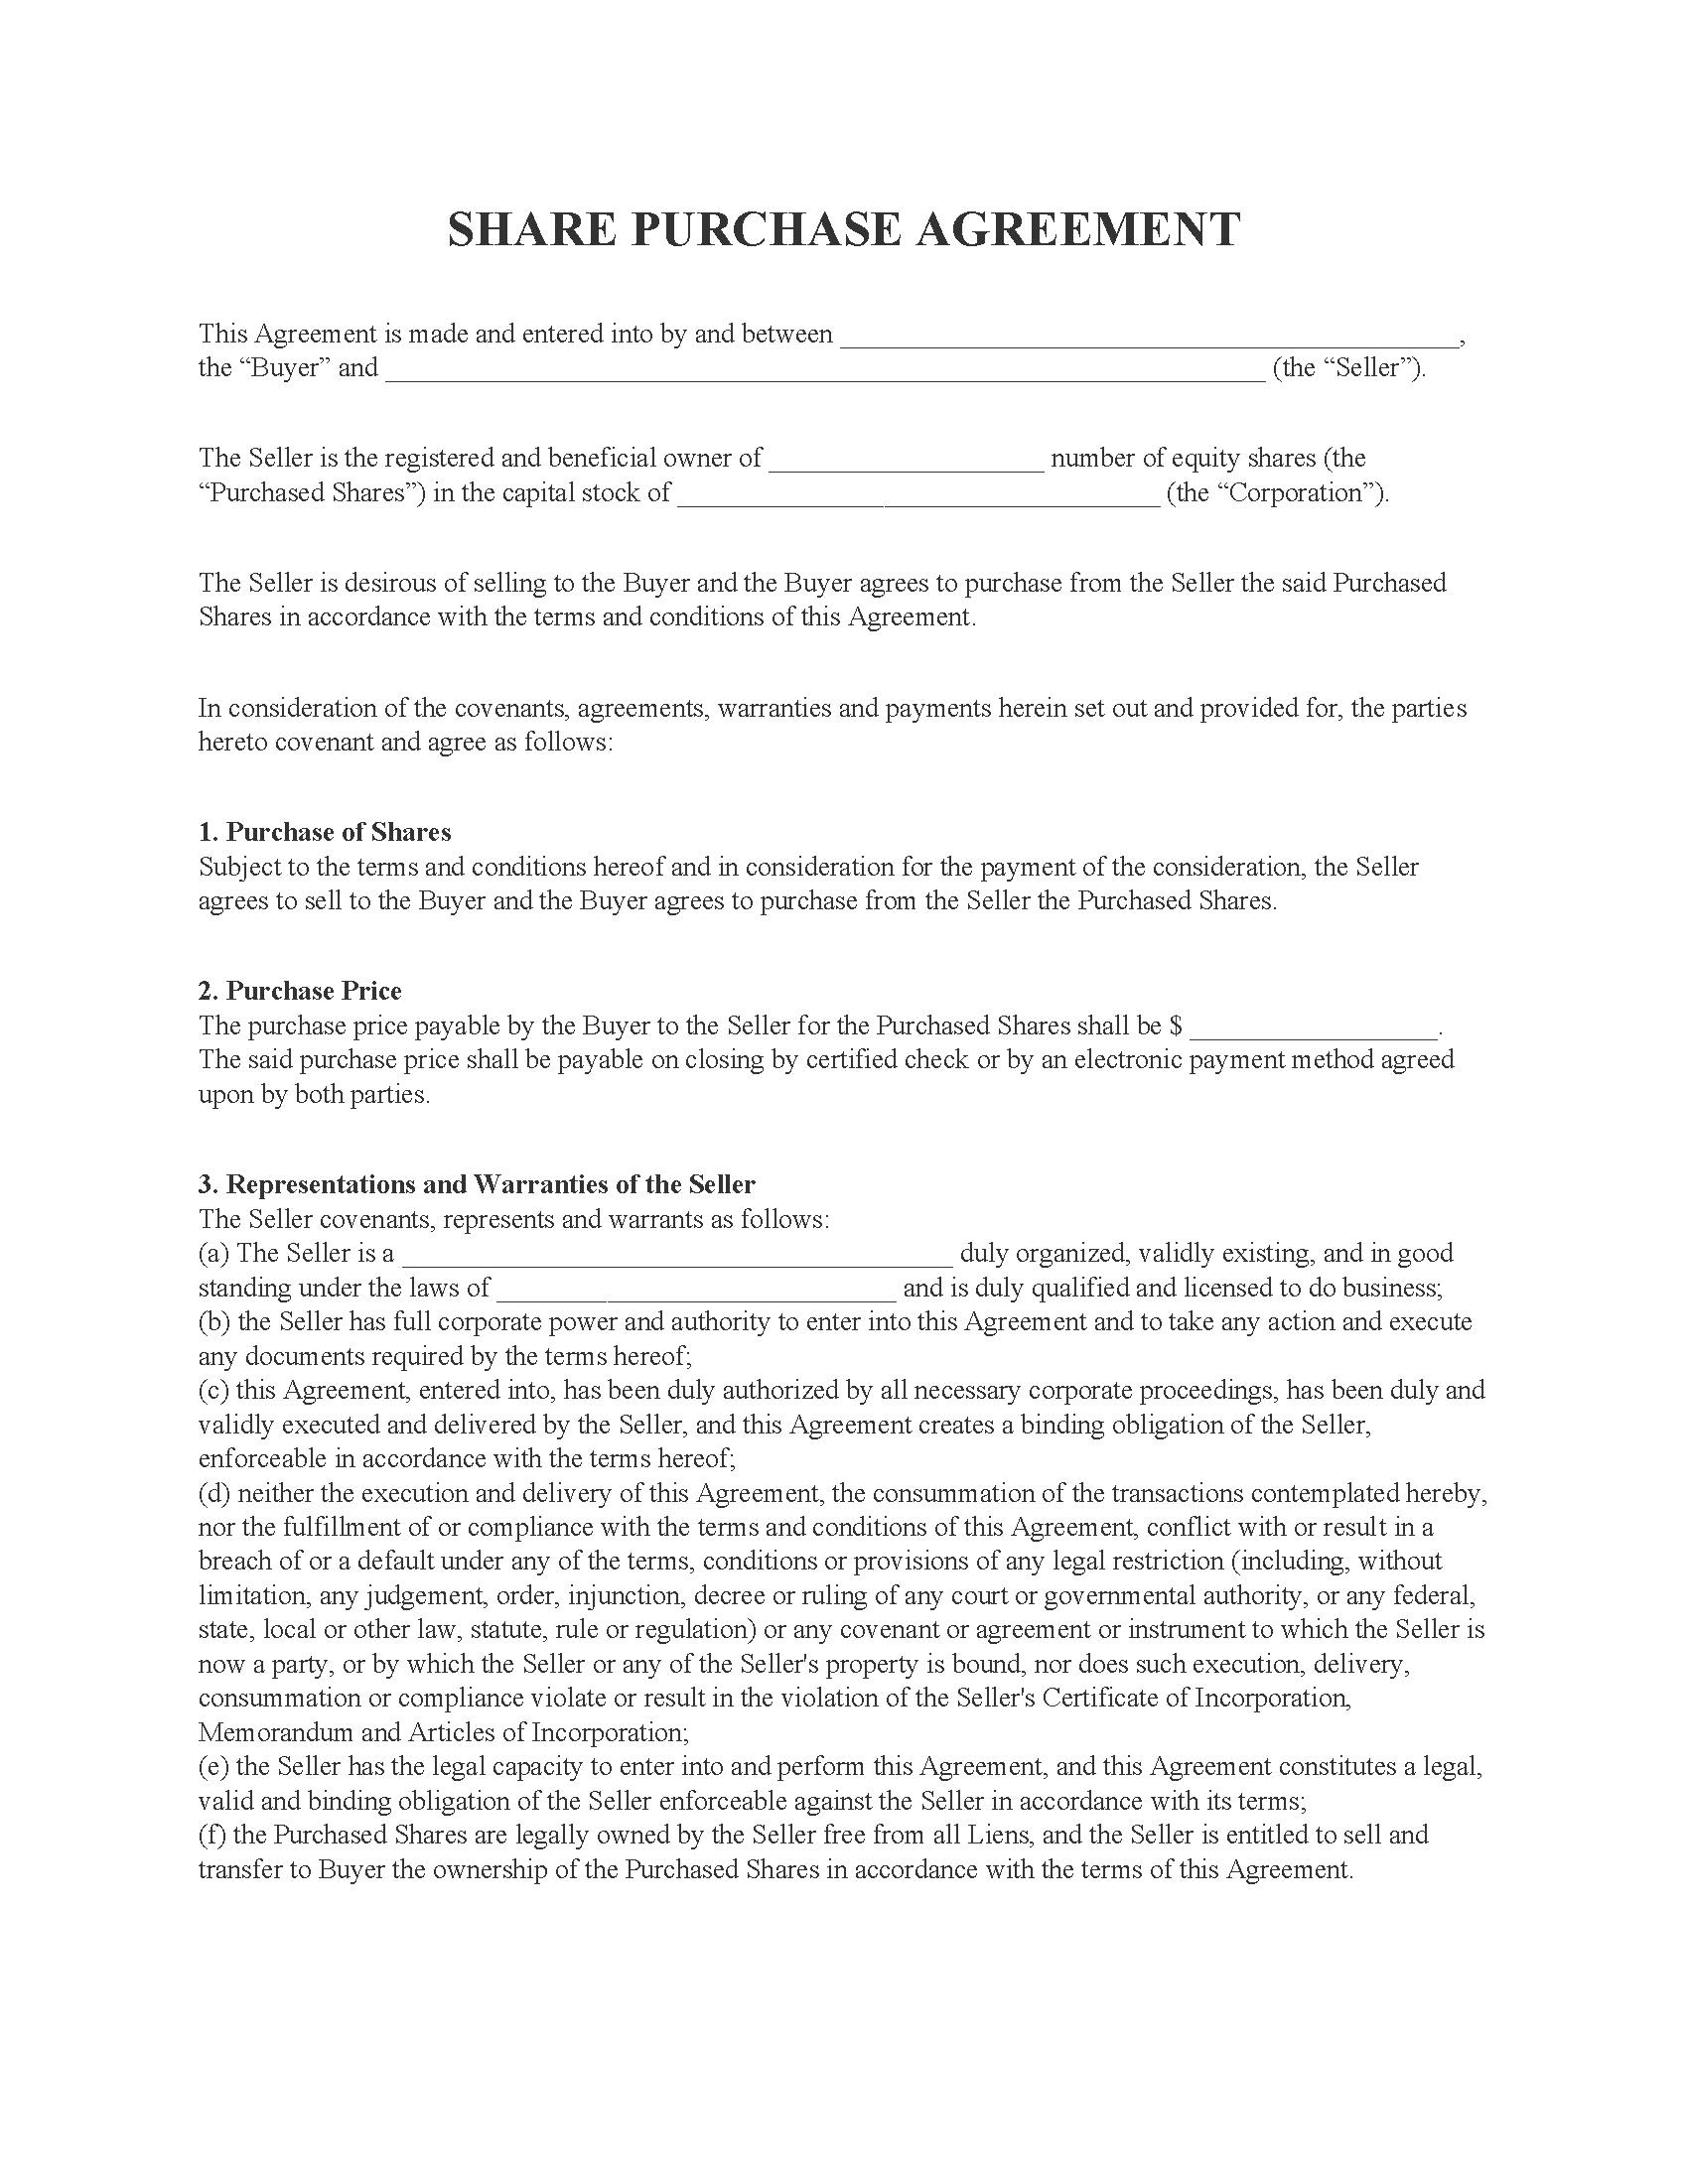 assignment of share purchase agreement